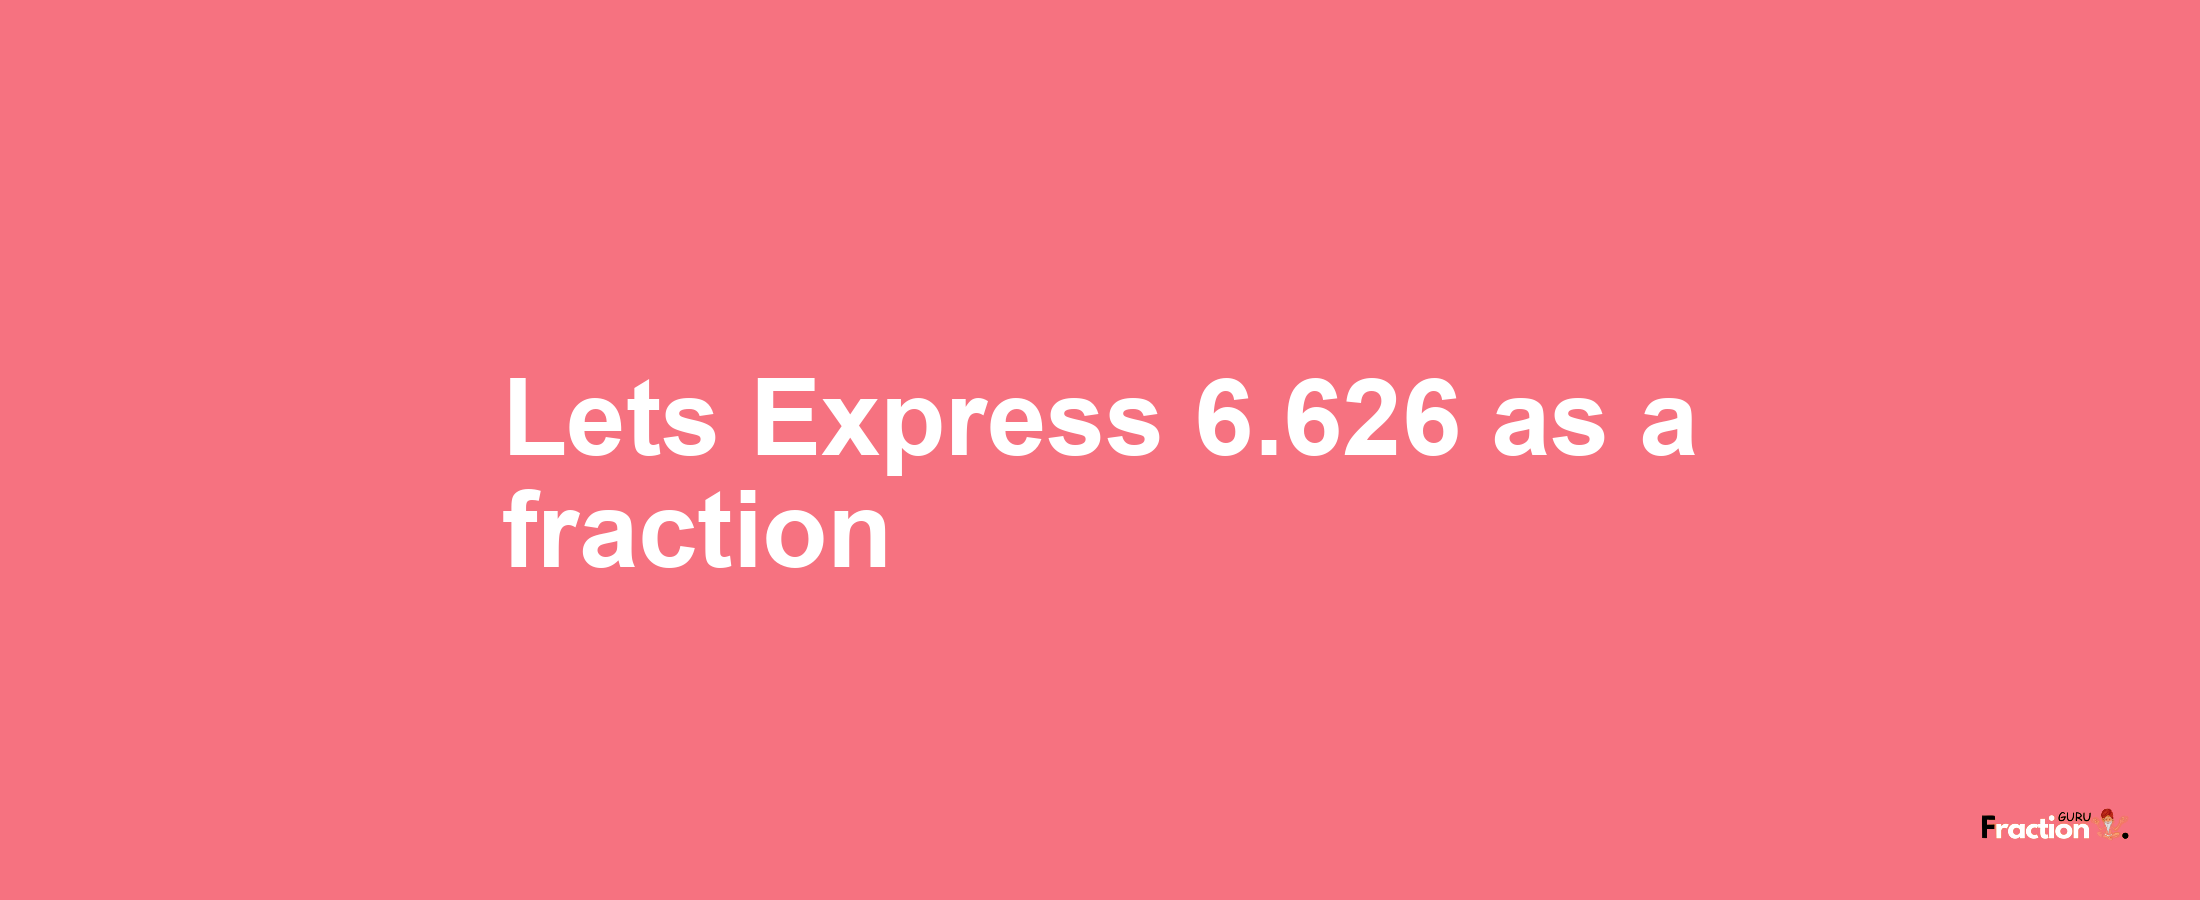 Lets Express 6.626 as afraction